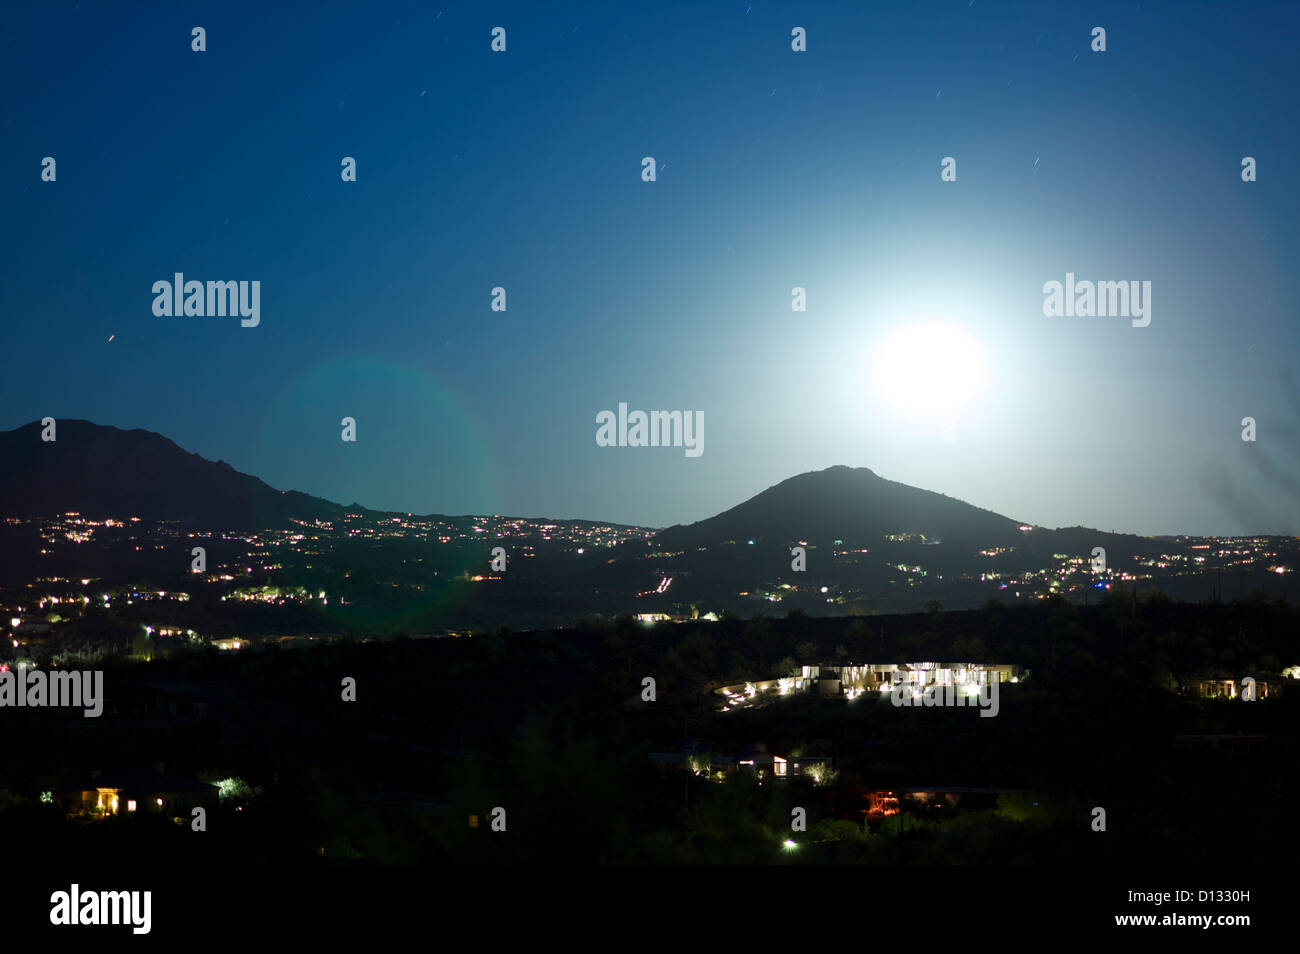 View of residential district and hills at night Stock Photo